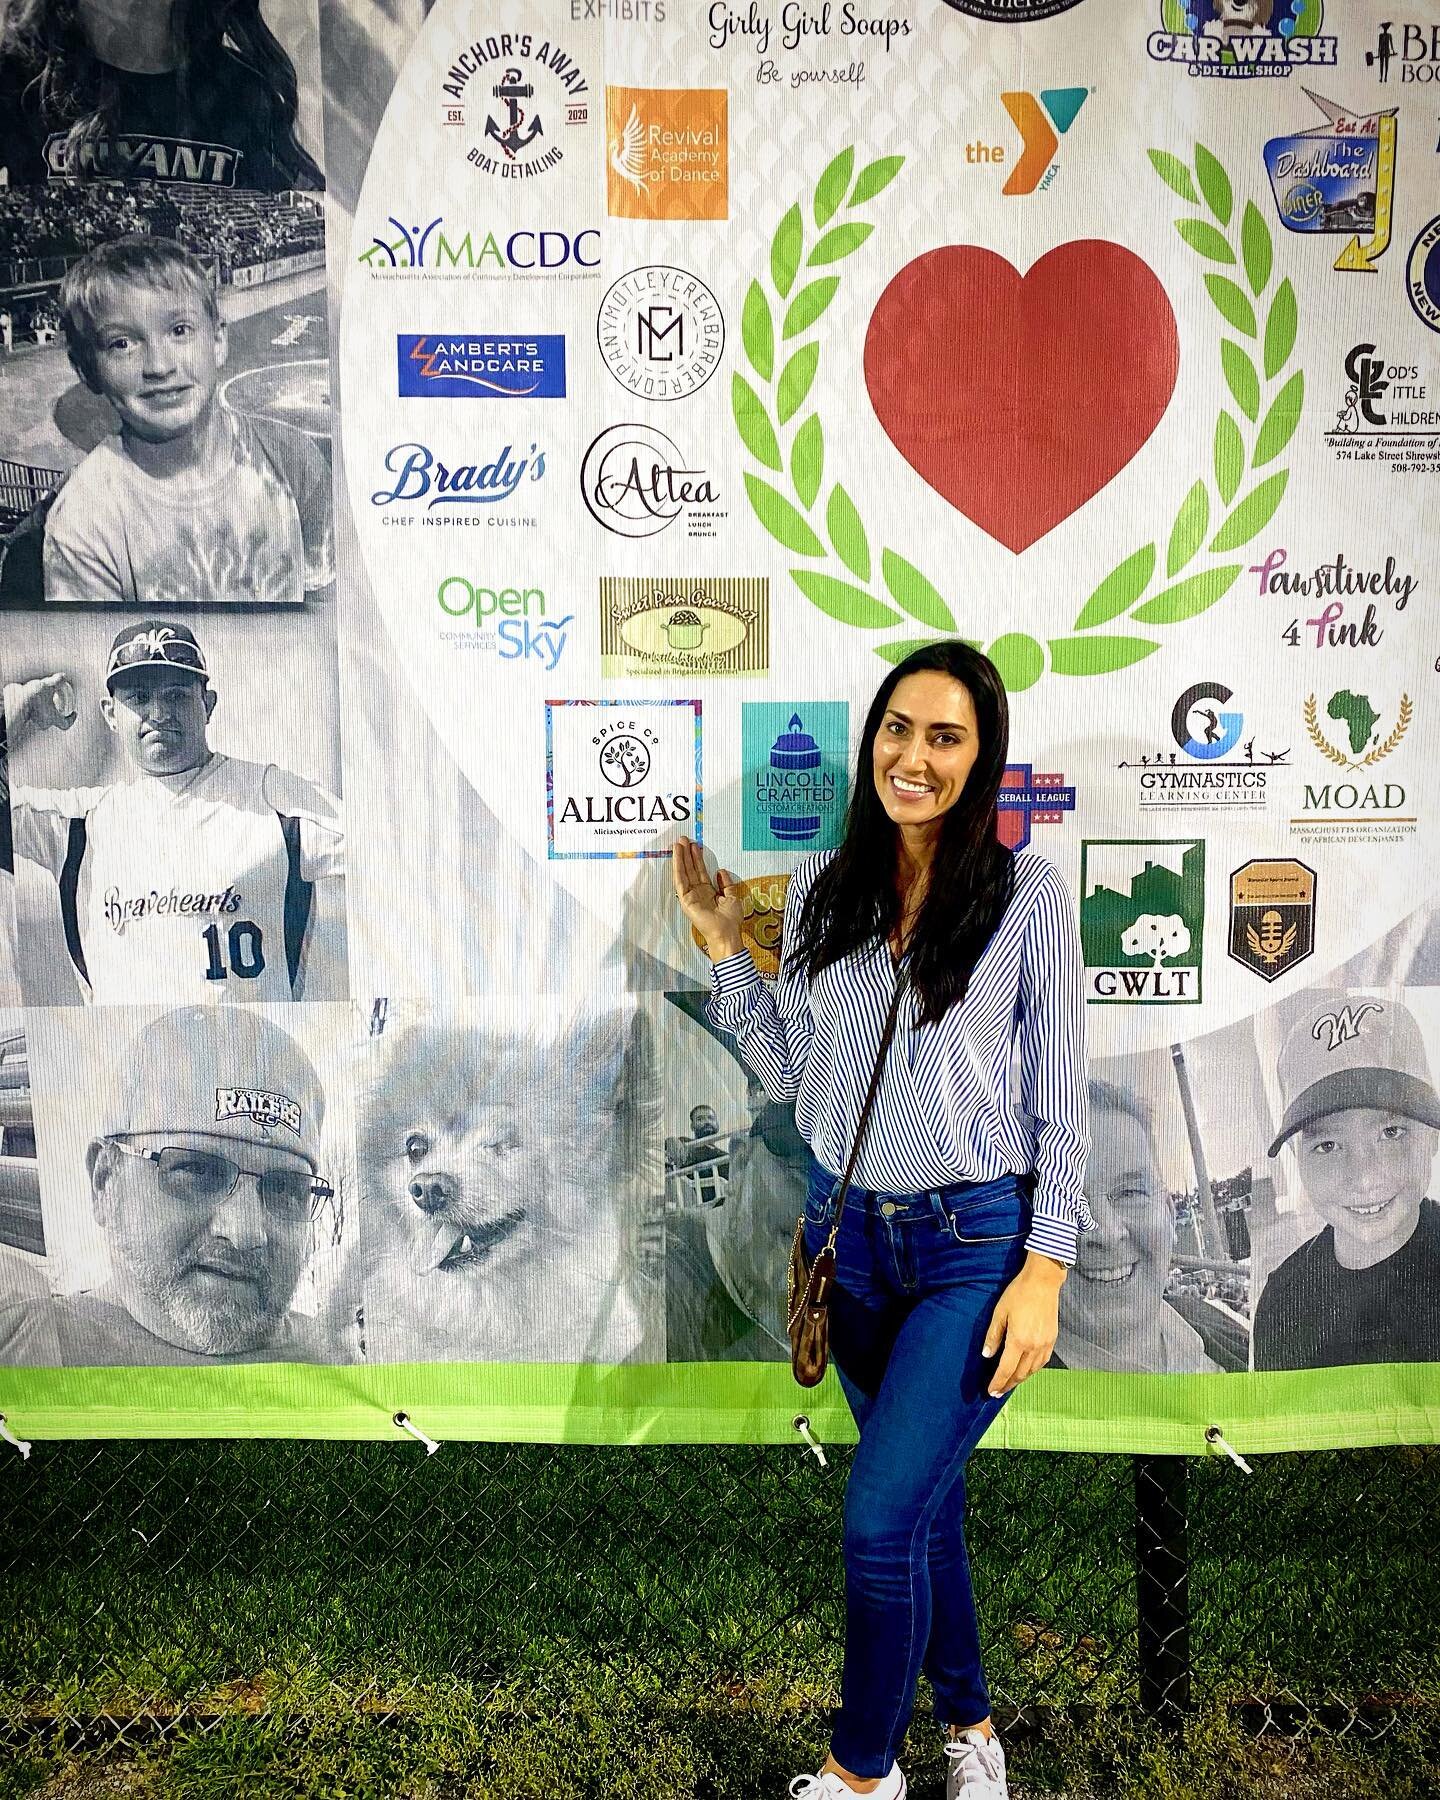 We love our community! Support for local is what makes small businesses stronger! Thank you @woobaseball for including our business in the unveiling of your outfield wall! We are PROUD to be a member of this community! All the feels! @cityofworcester